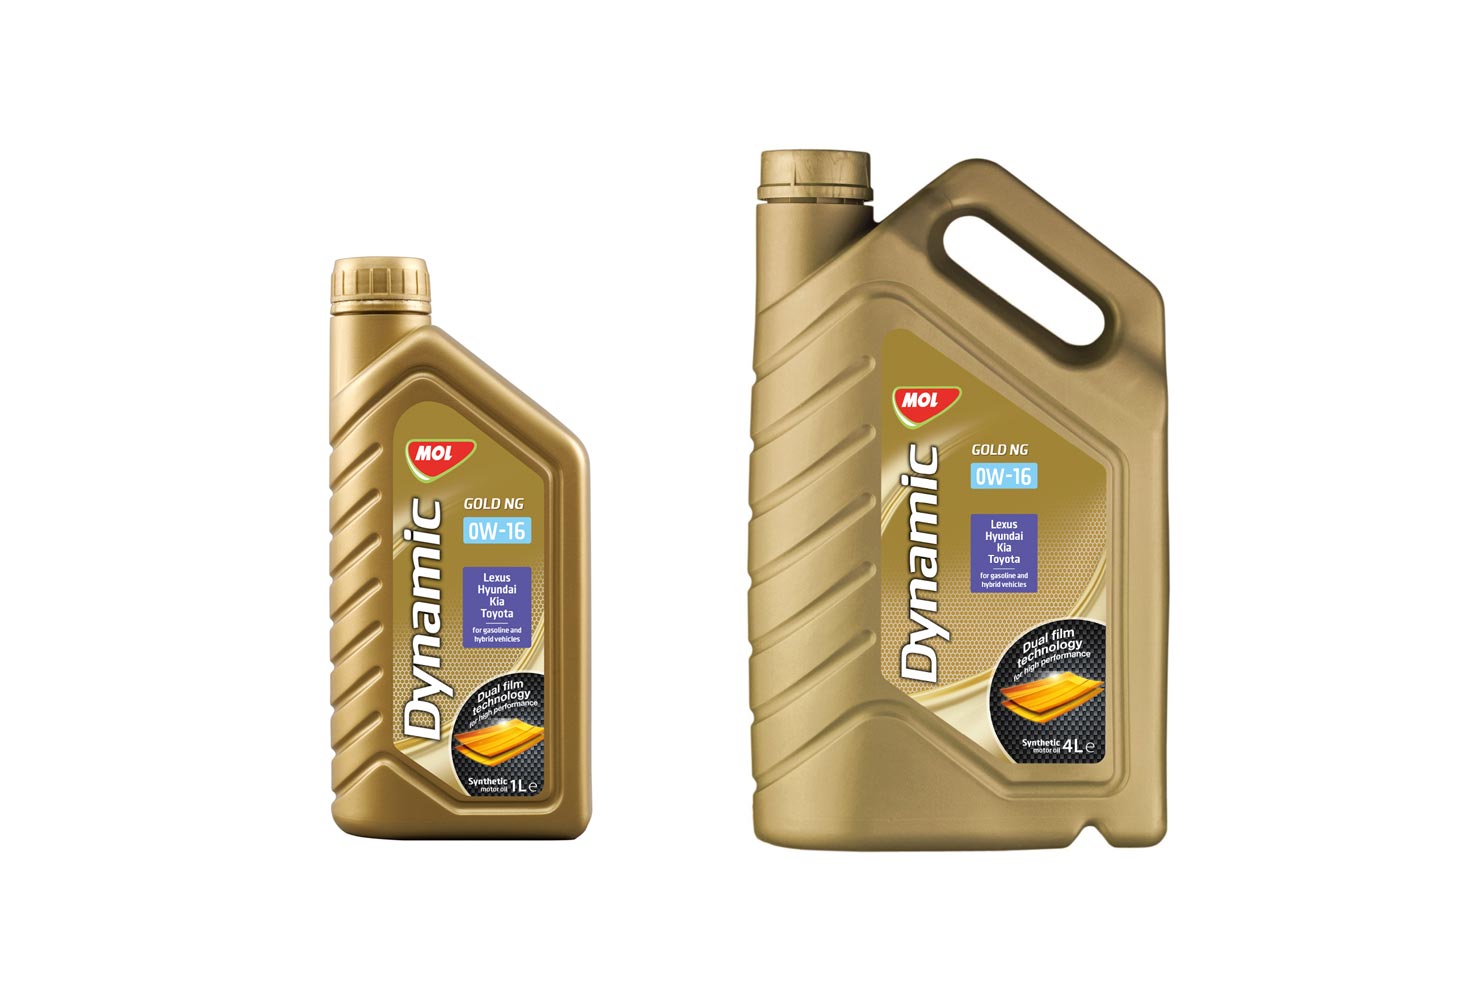 MOL Lubricants introduces ultra-low viscosity engine oil